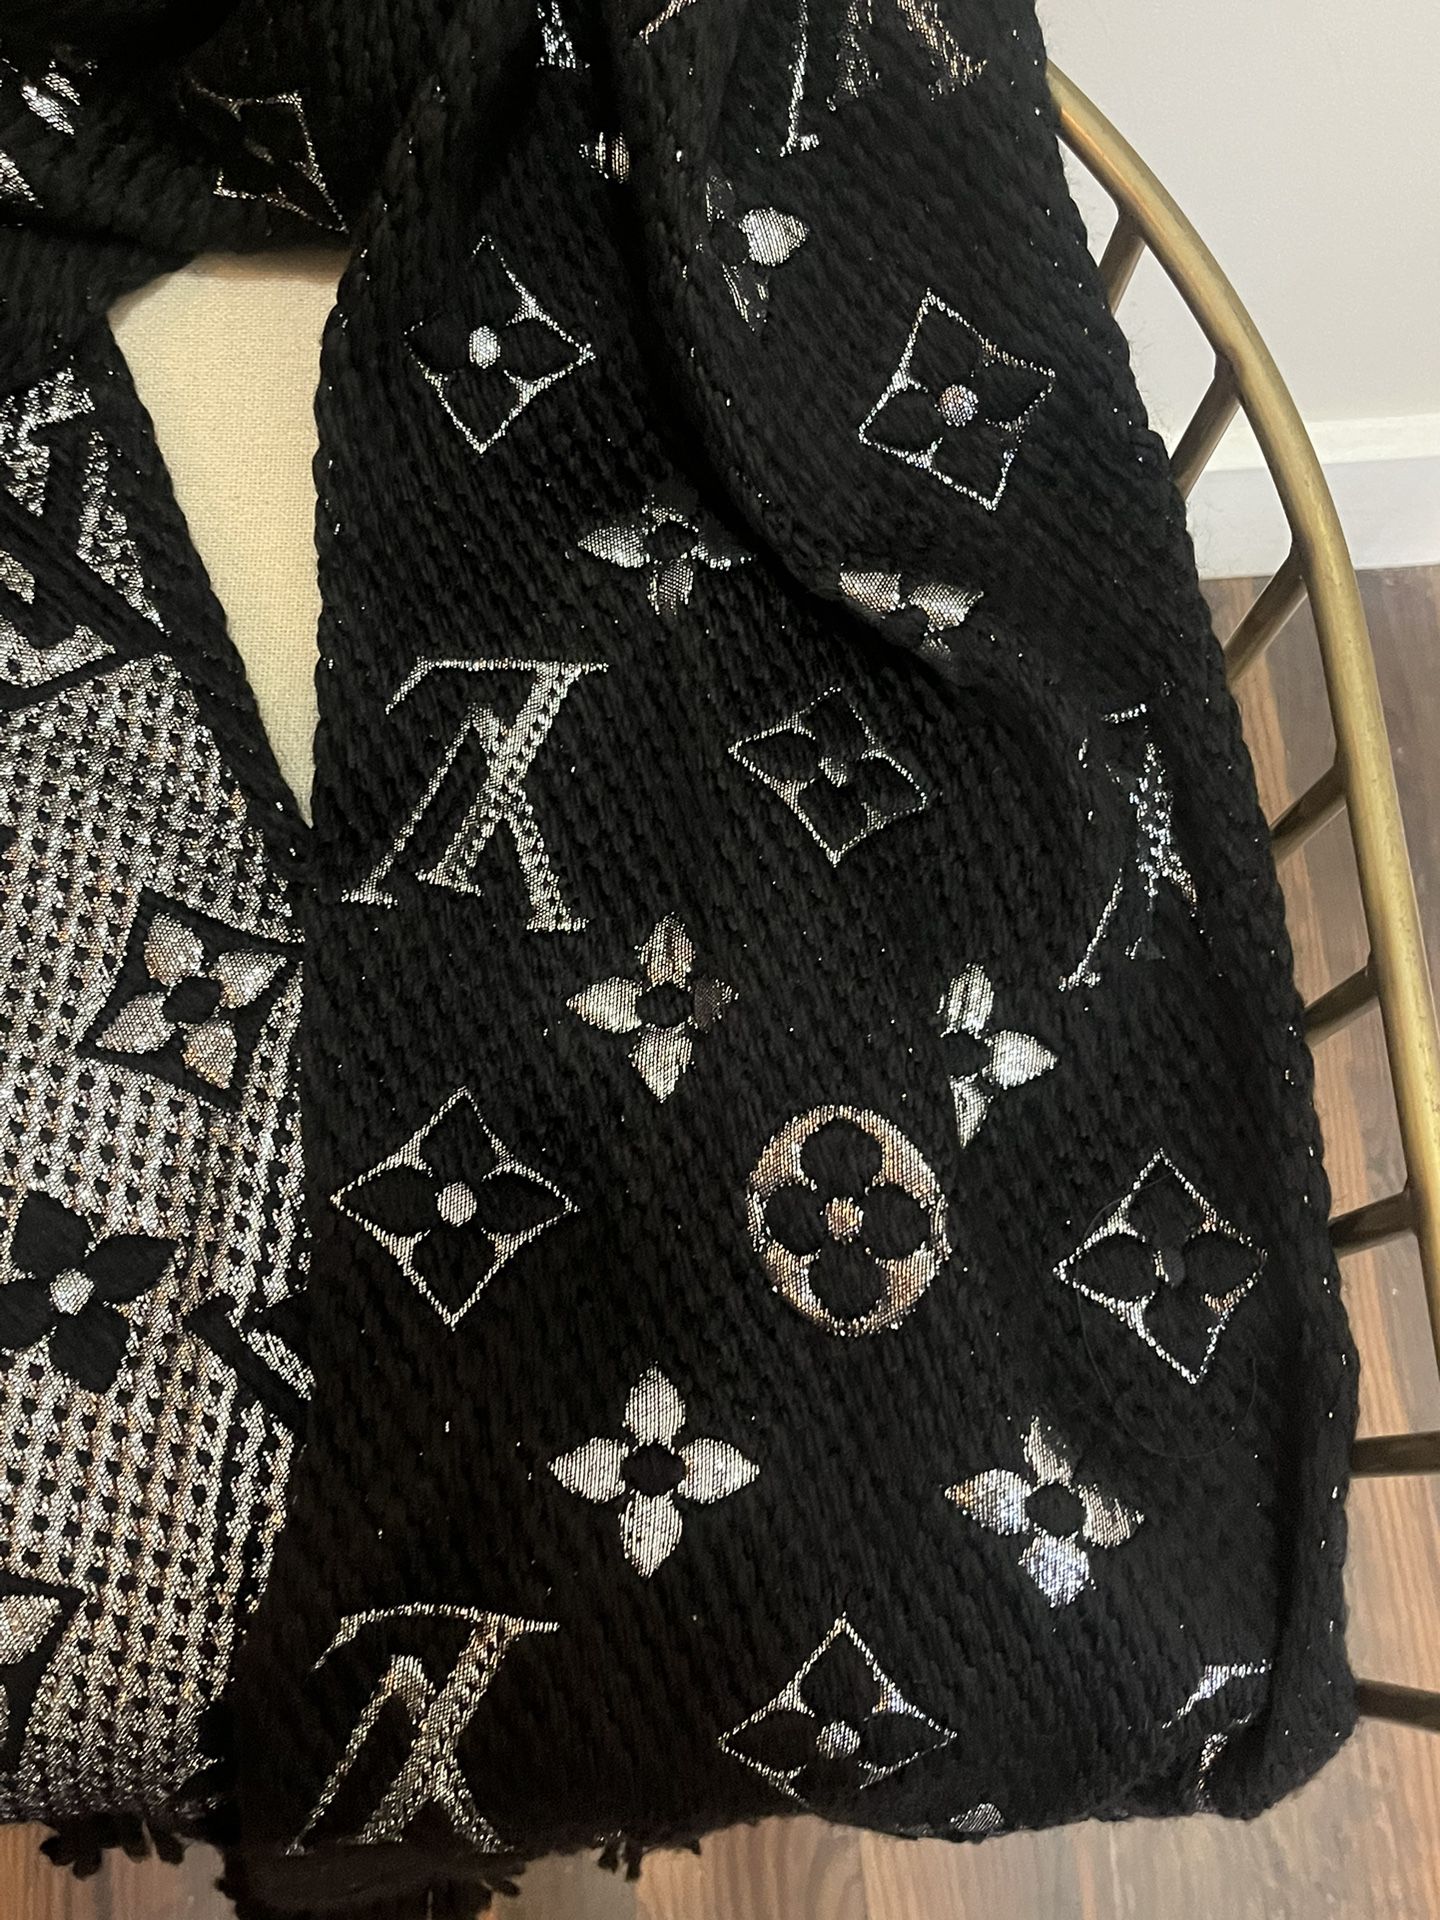 Louis Vuitton Scarf for Sale in Boston, MA - OfferUp